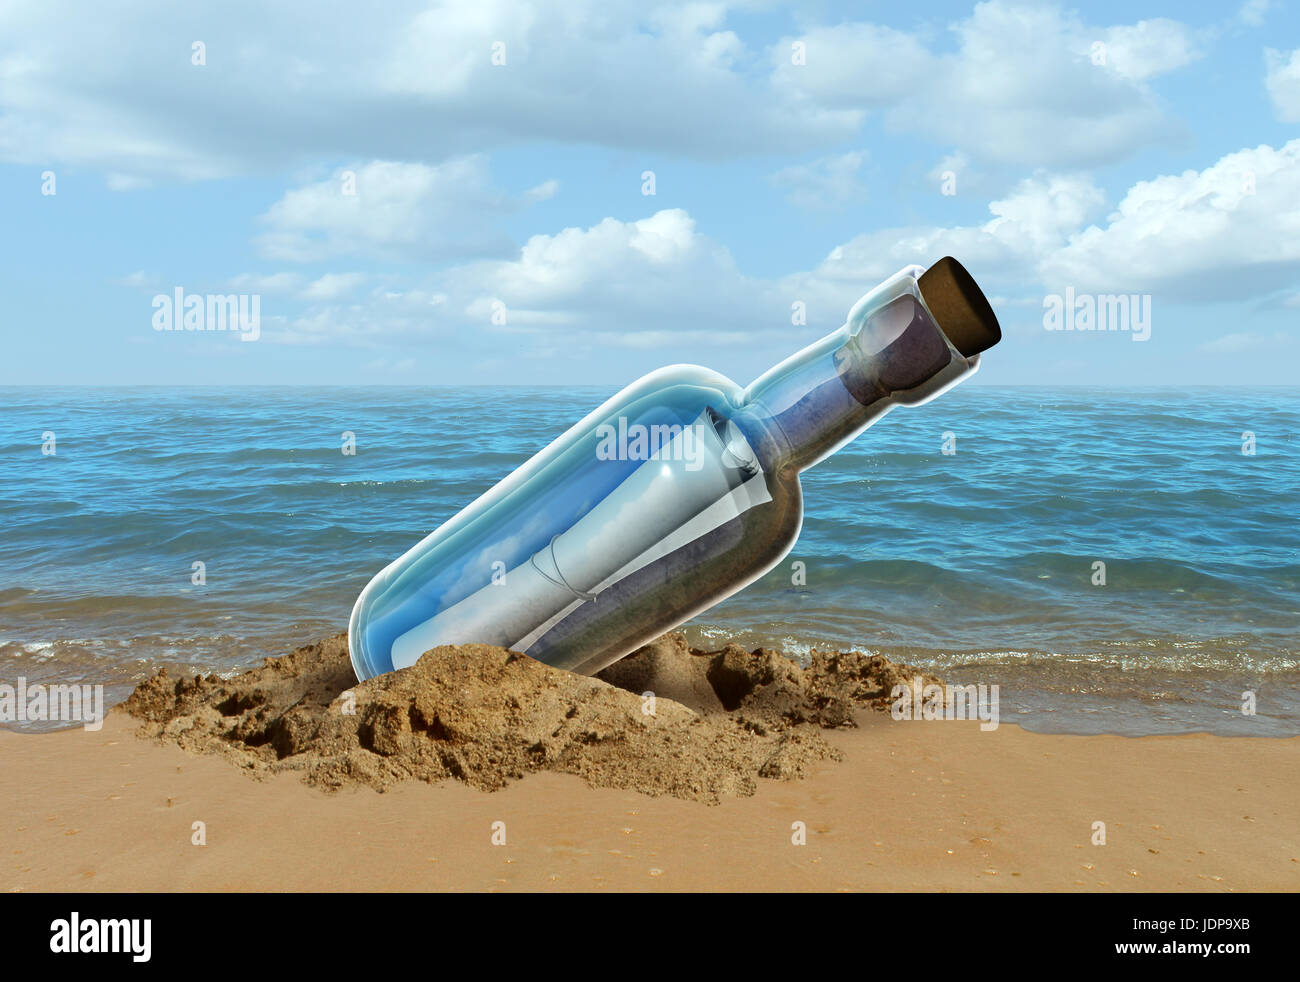 Message in a bottle concept as a note on a sealed glass container as a communication metaphor for sending a letter of help from a castaway. Stock Photo